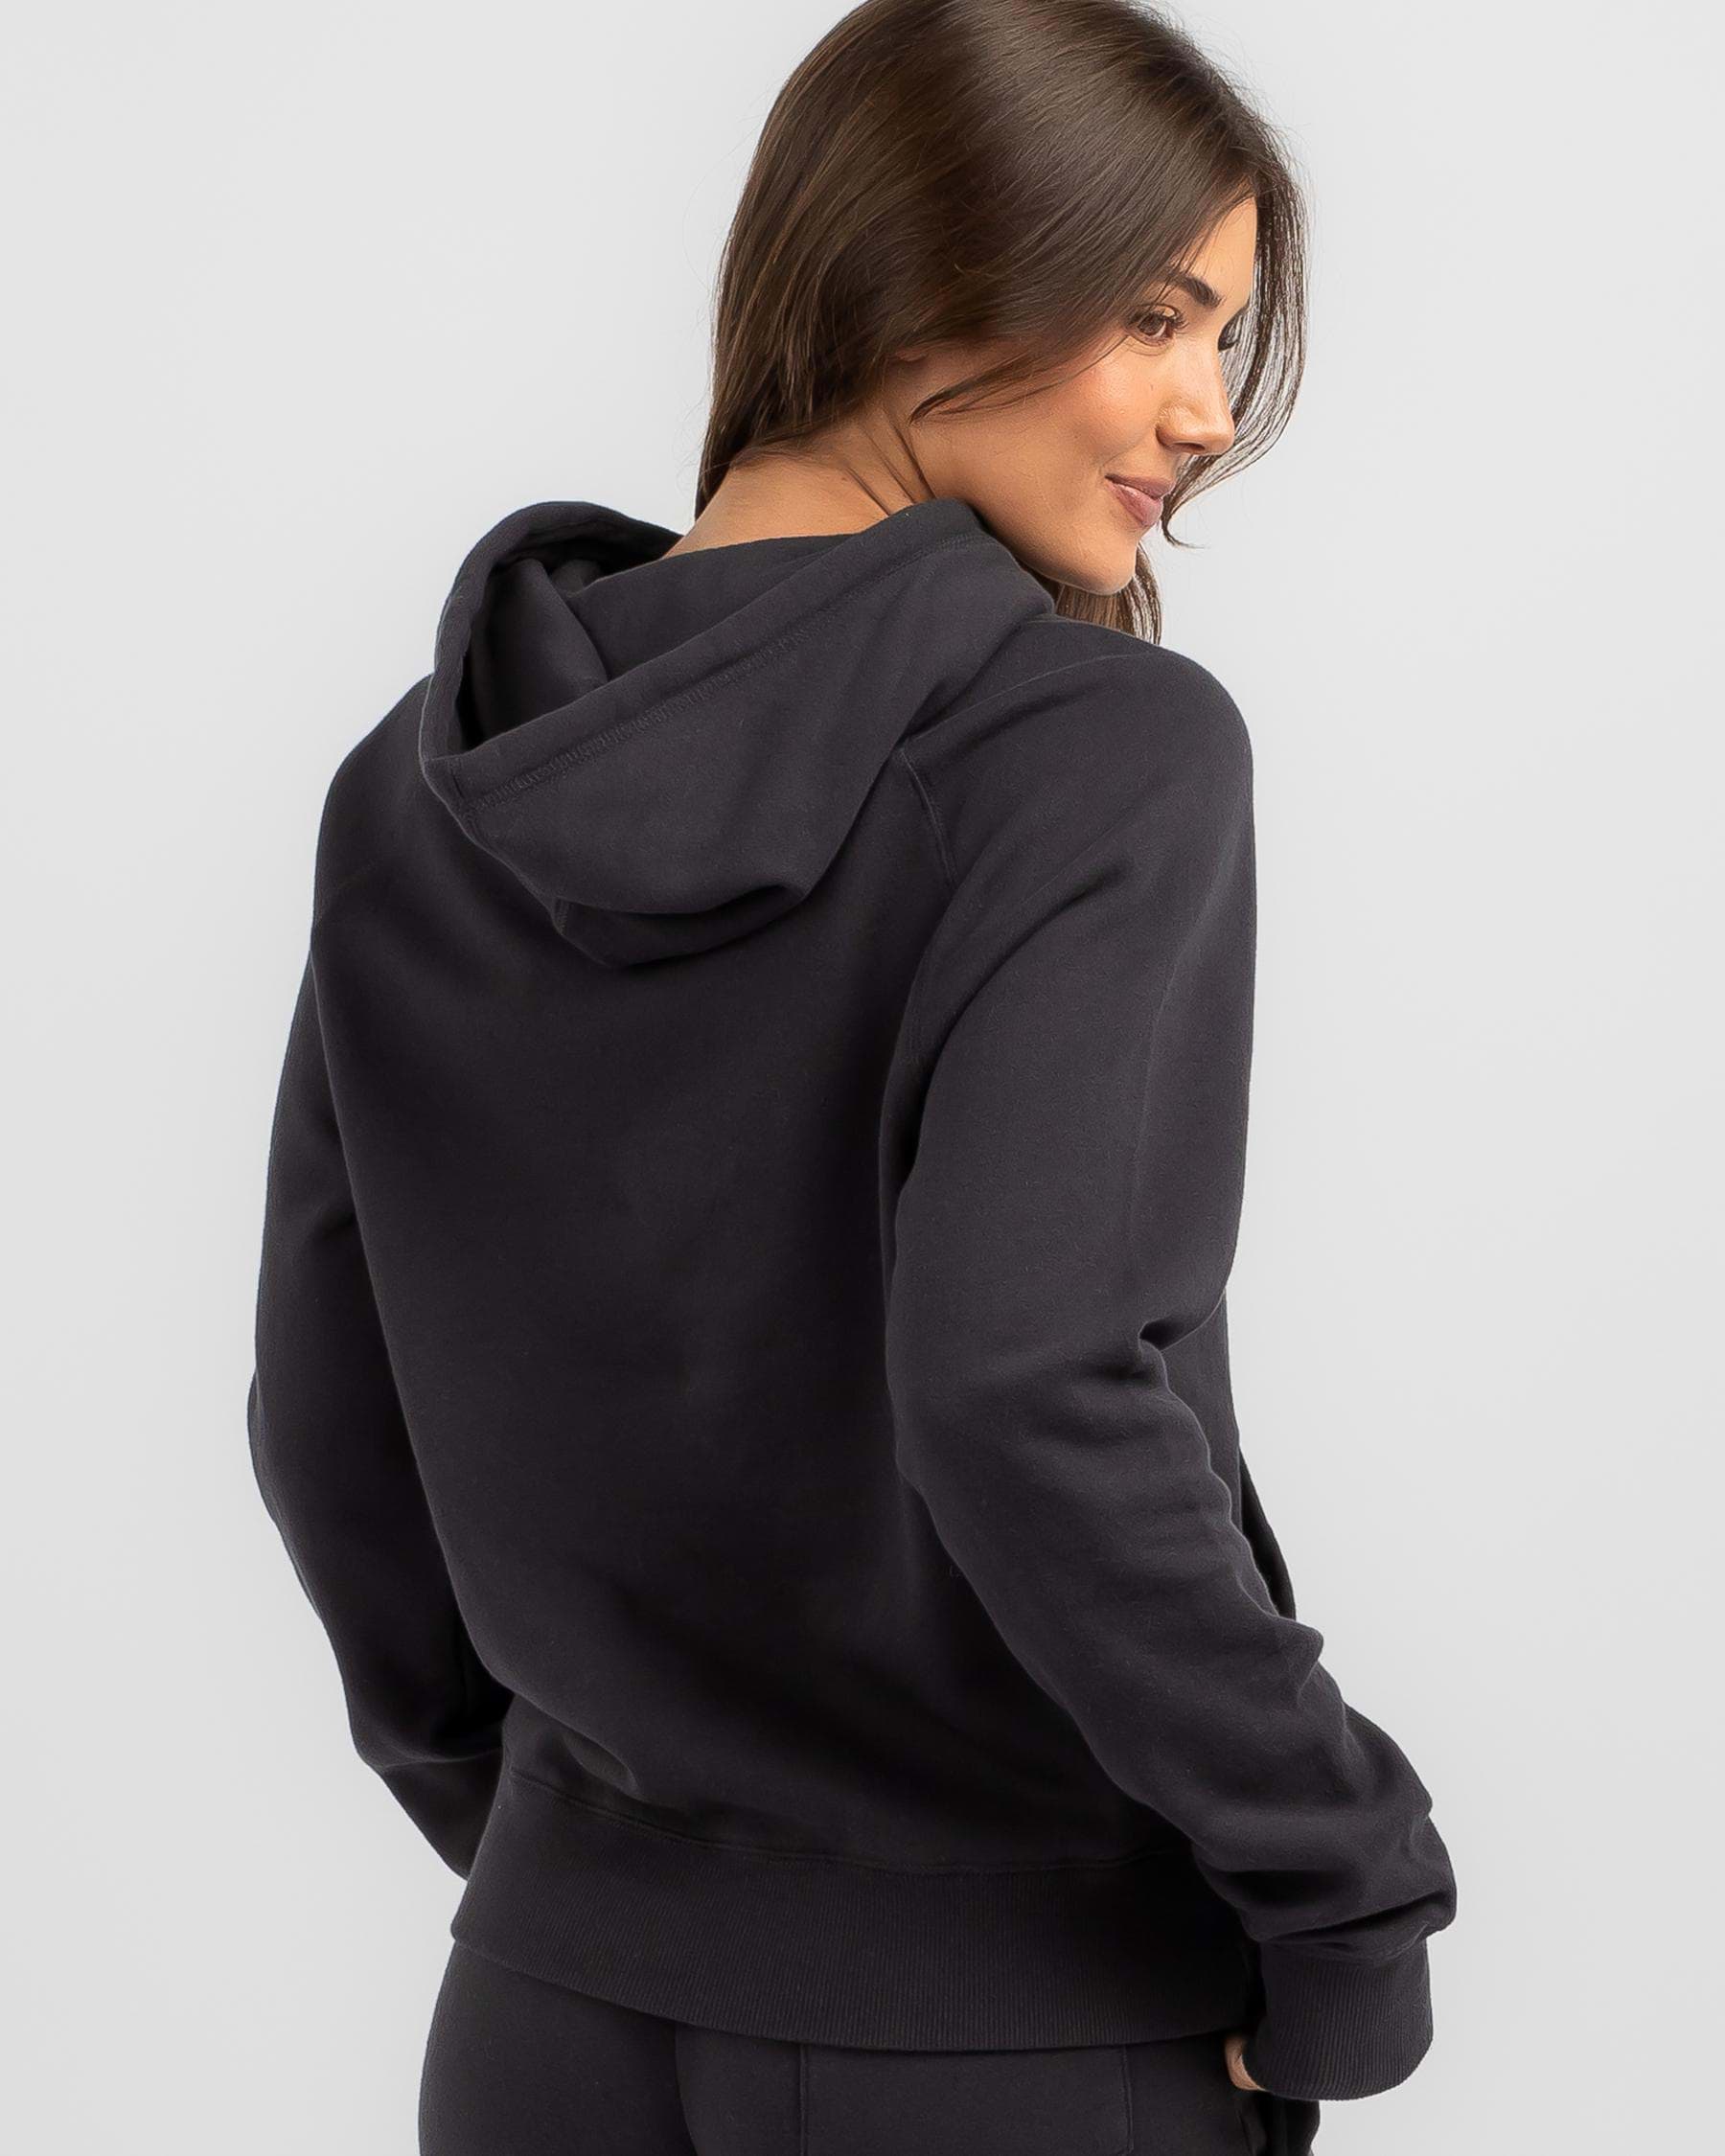 Billabong Society Hoodie In Black Sands - FREE* Shipping & Easy Returns ...